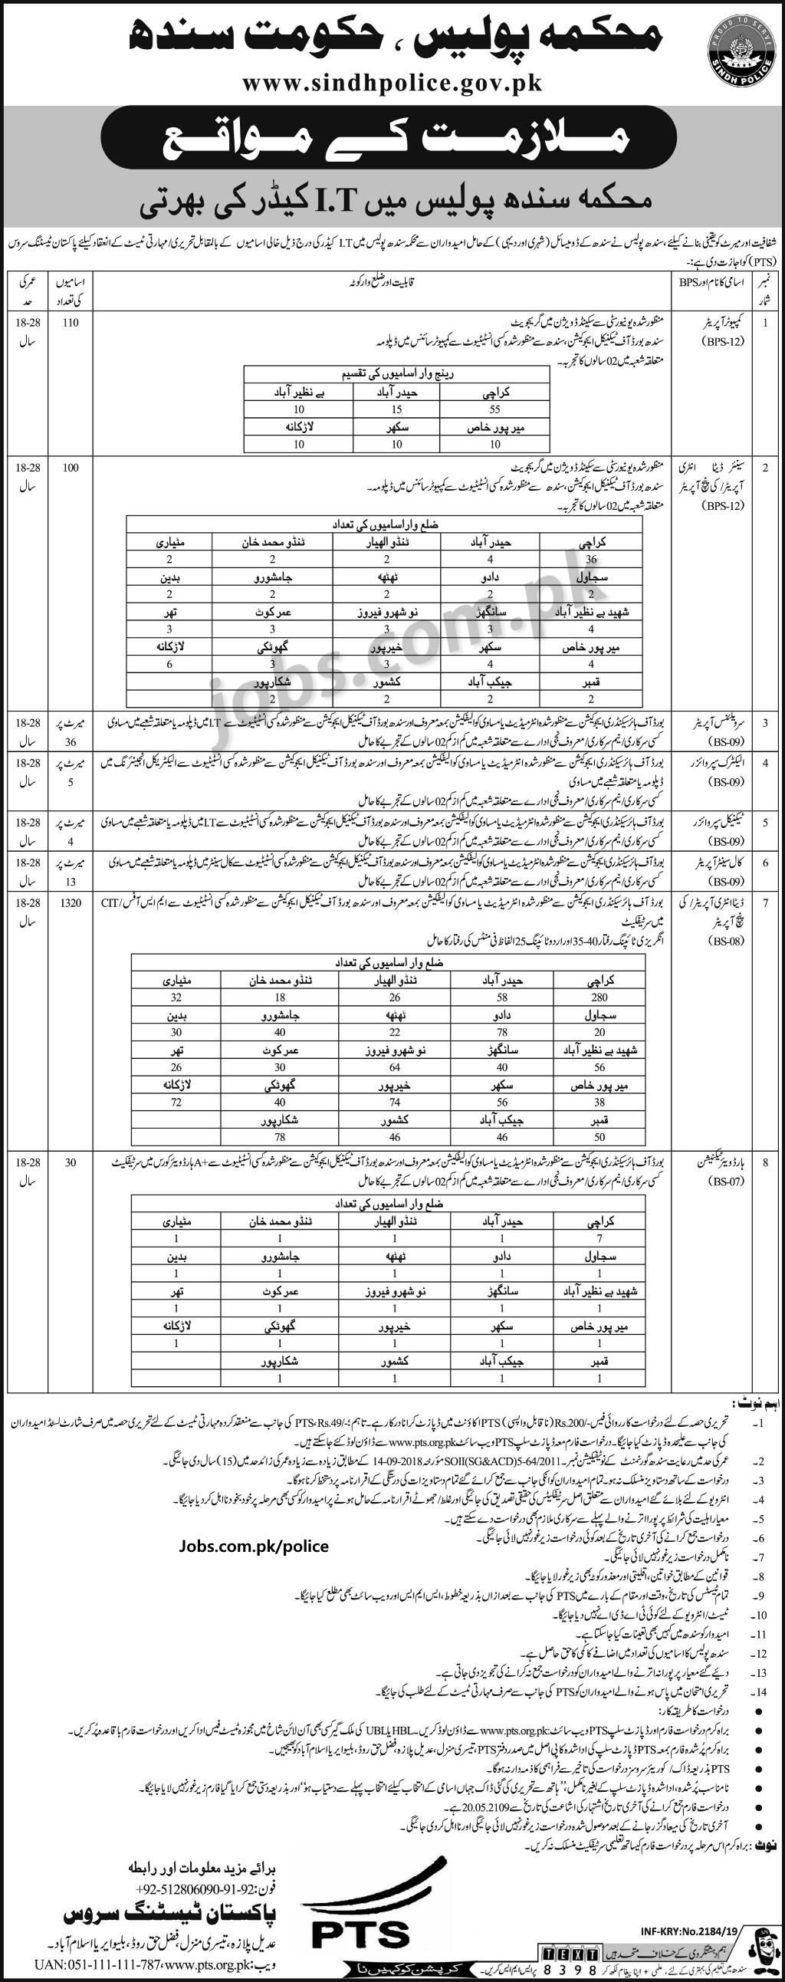 Police Department Sindh Recruitment 2019 for 1618+ Computer Operators, DEOs, Key Punch Operators, Surveillance Operators & Other Posts (Download PTS Form)